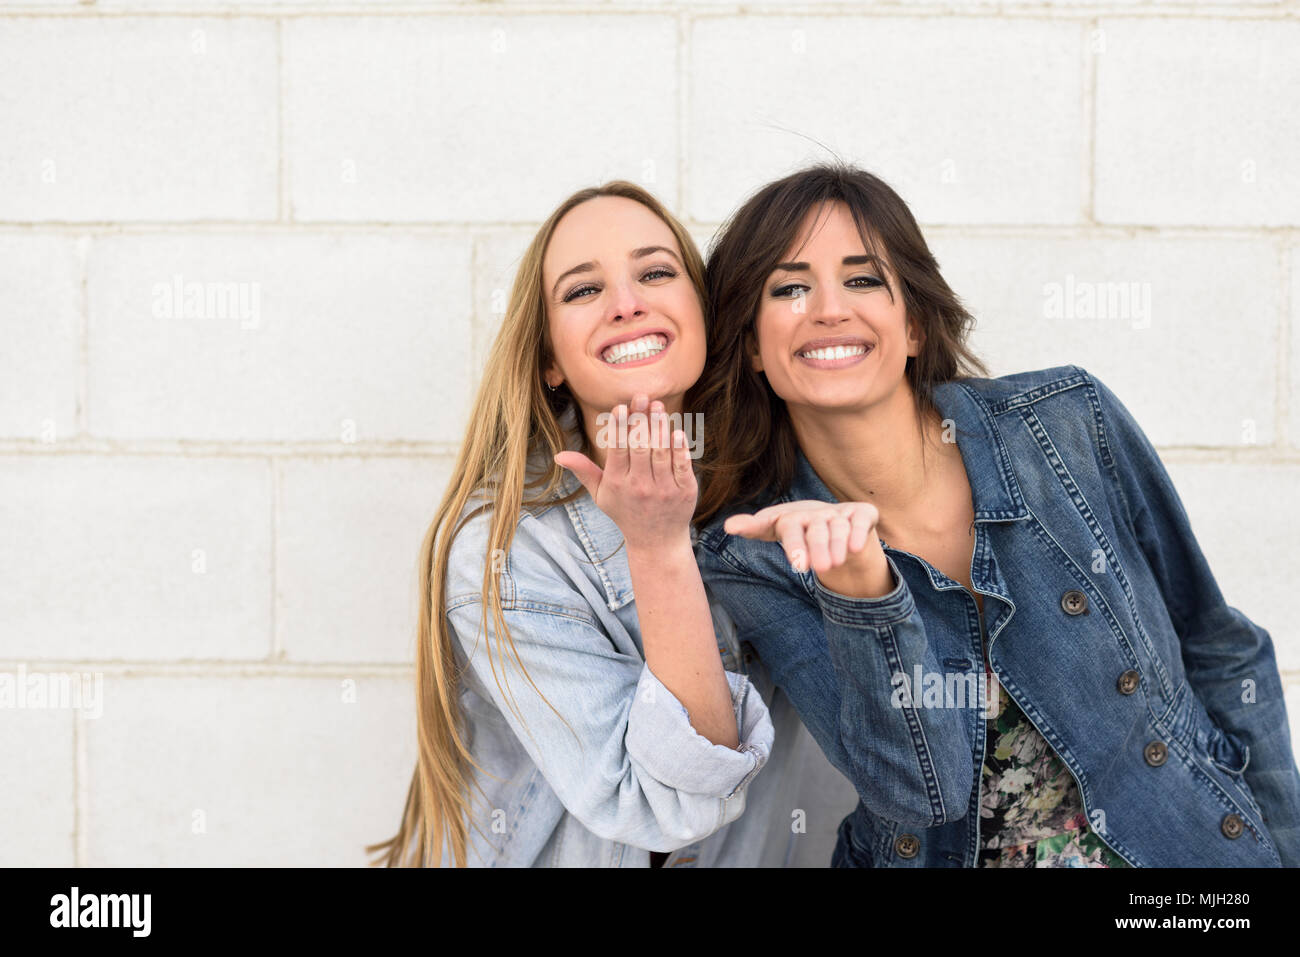 Two beautiful girls blowing a kiss on urban wall outdoors. Young women wearing casual clothes. Stock Photo